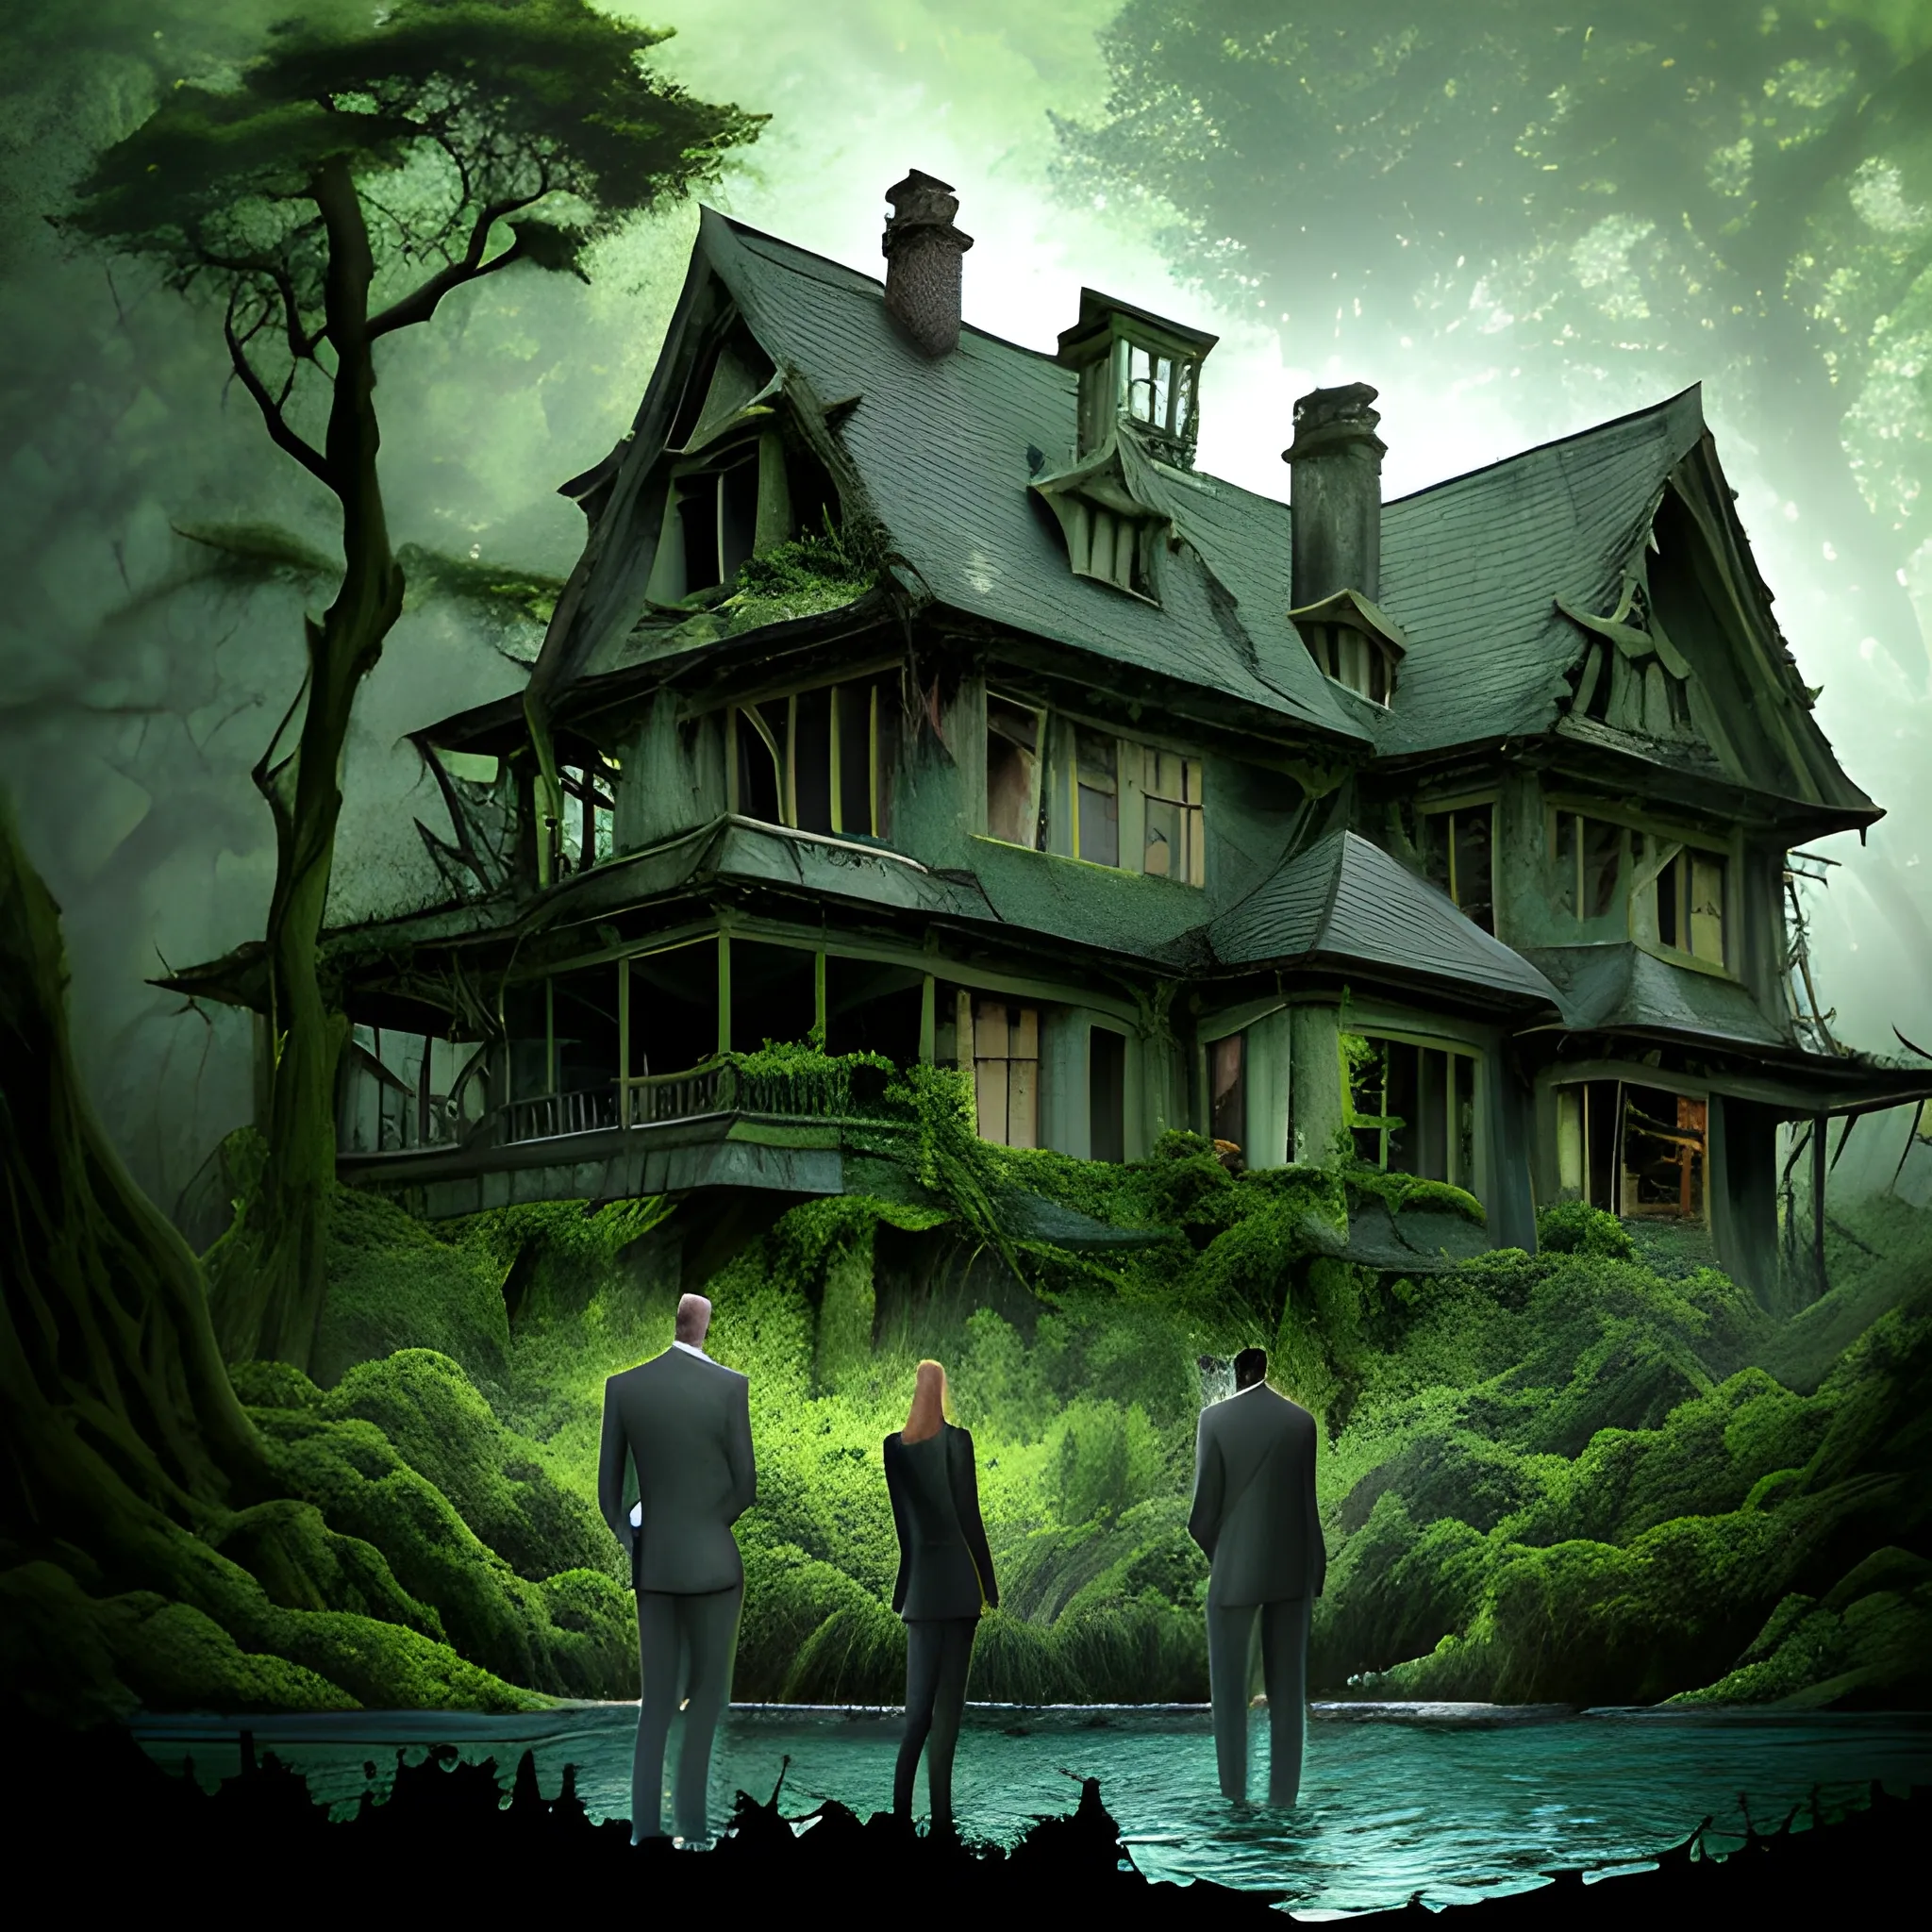 Description: Picture four children (two boys and two girls) standing at the edge of a dense forest. They should look intrigued and maybe a bit cautious as they observe an old, eerie house that seems to have appeared among the trees. The house should look dilapidated, with broken windows and ivy creeping up its walls., Water Color